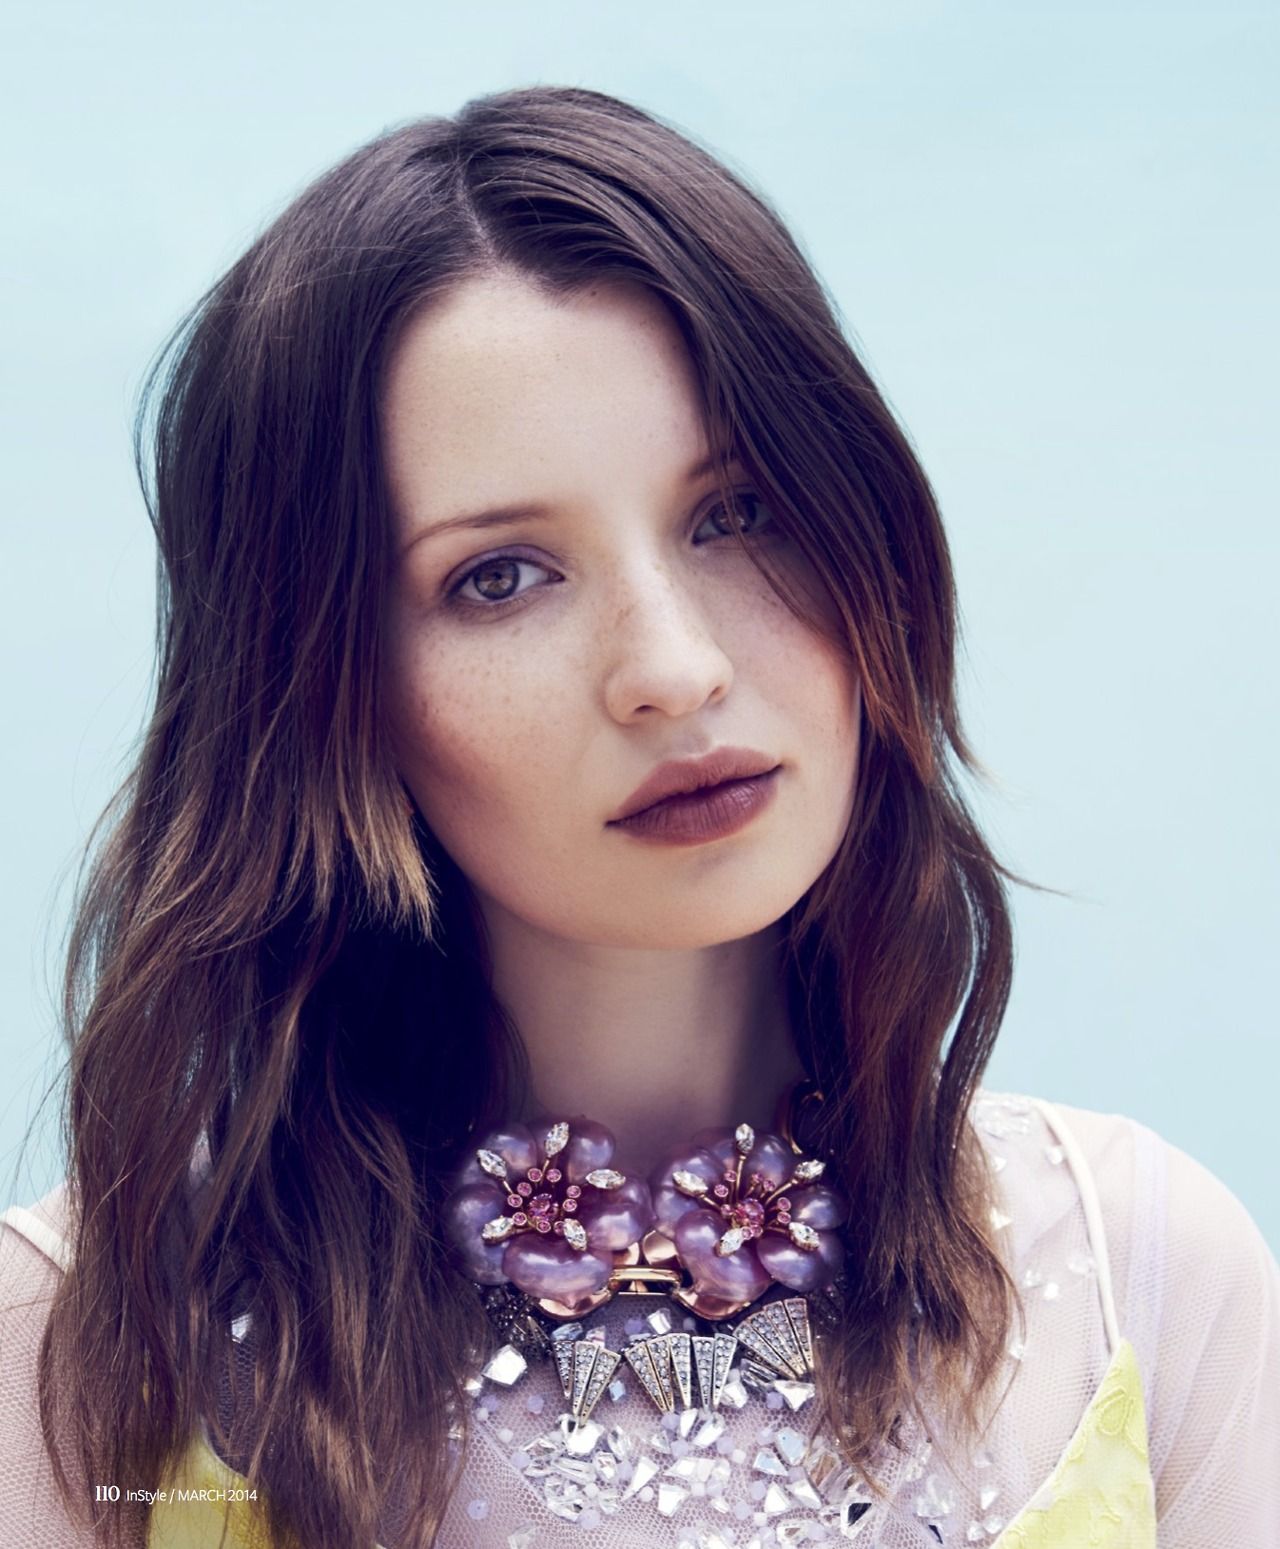 emily-browning-instyle-magazine-australia-march-2014-issue_4.jpg